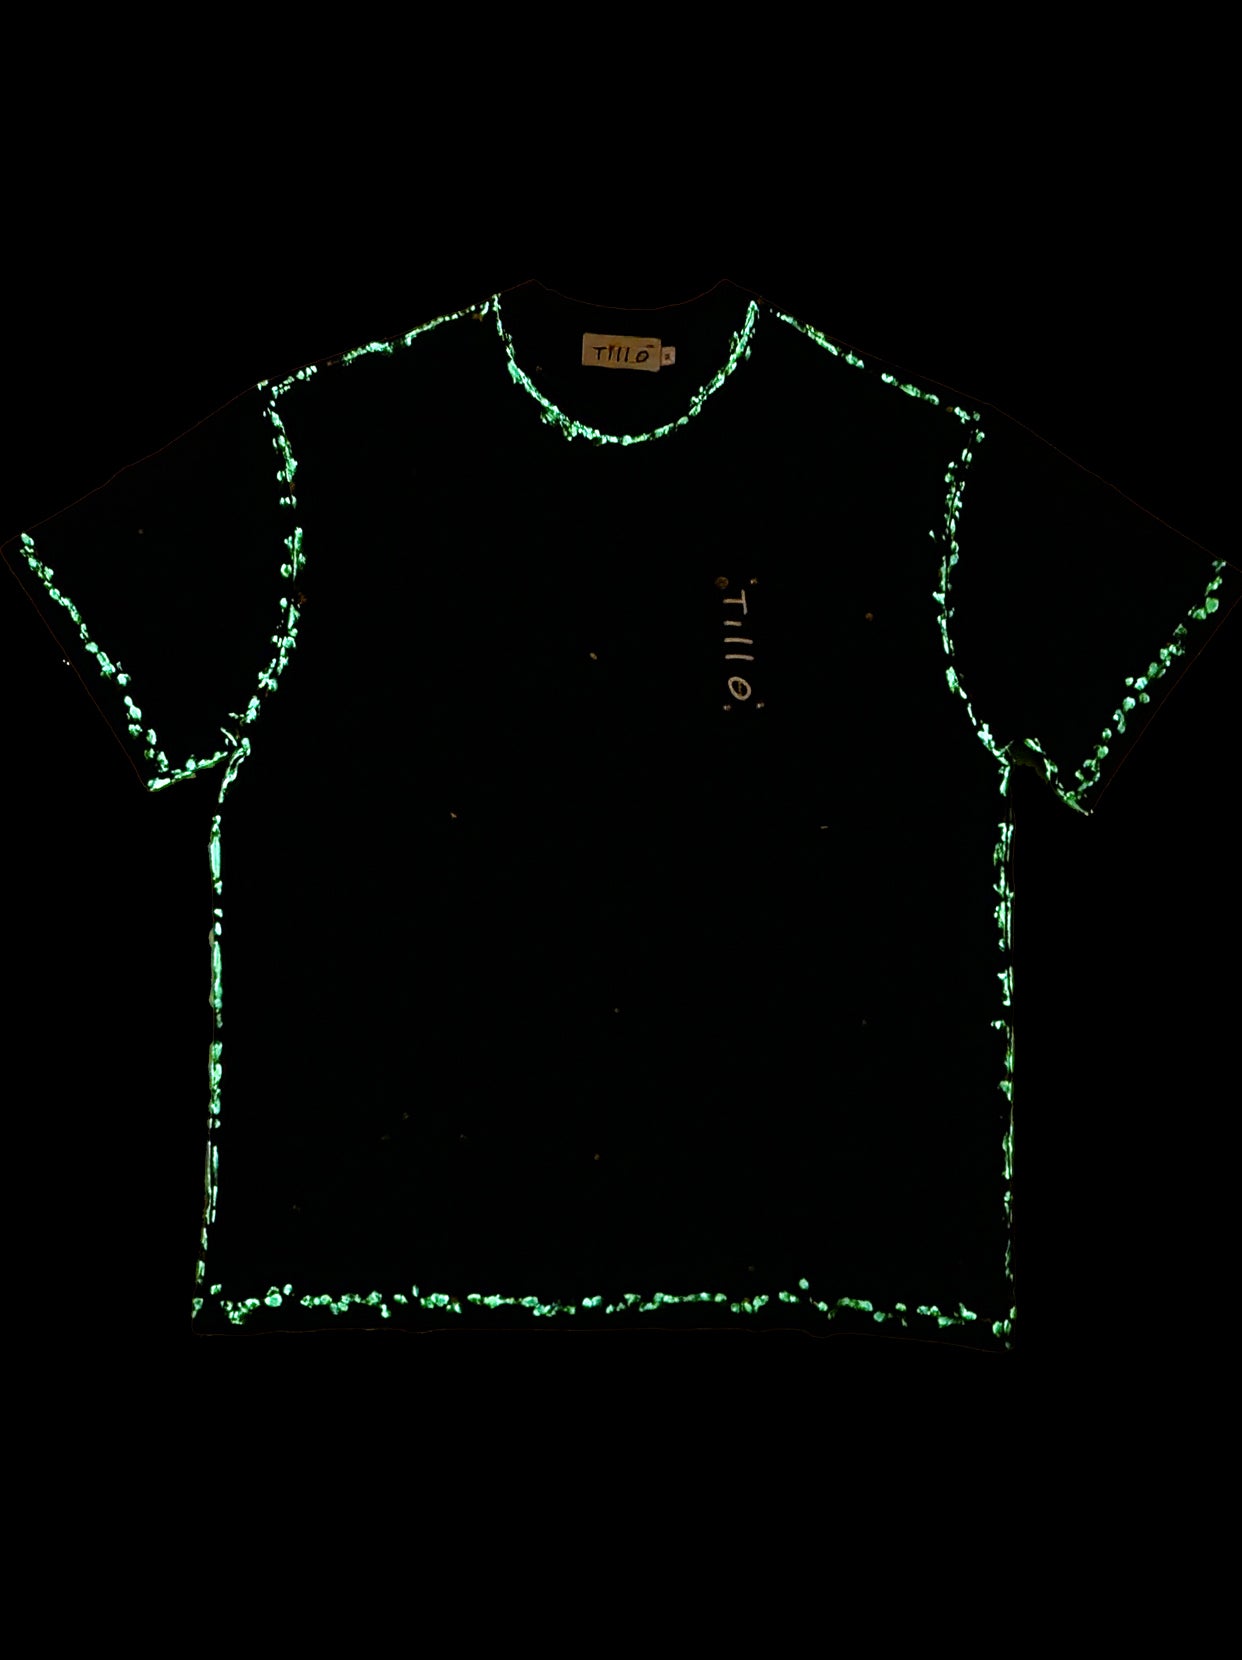 Leather Label Black Distressed "NIGHT GLO" T-Shirt